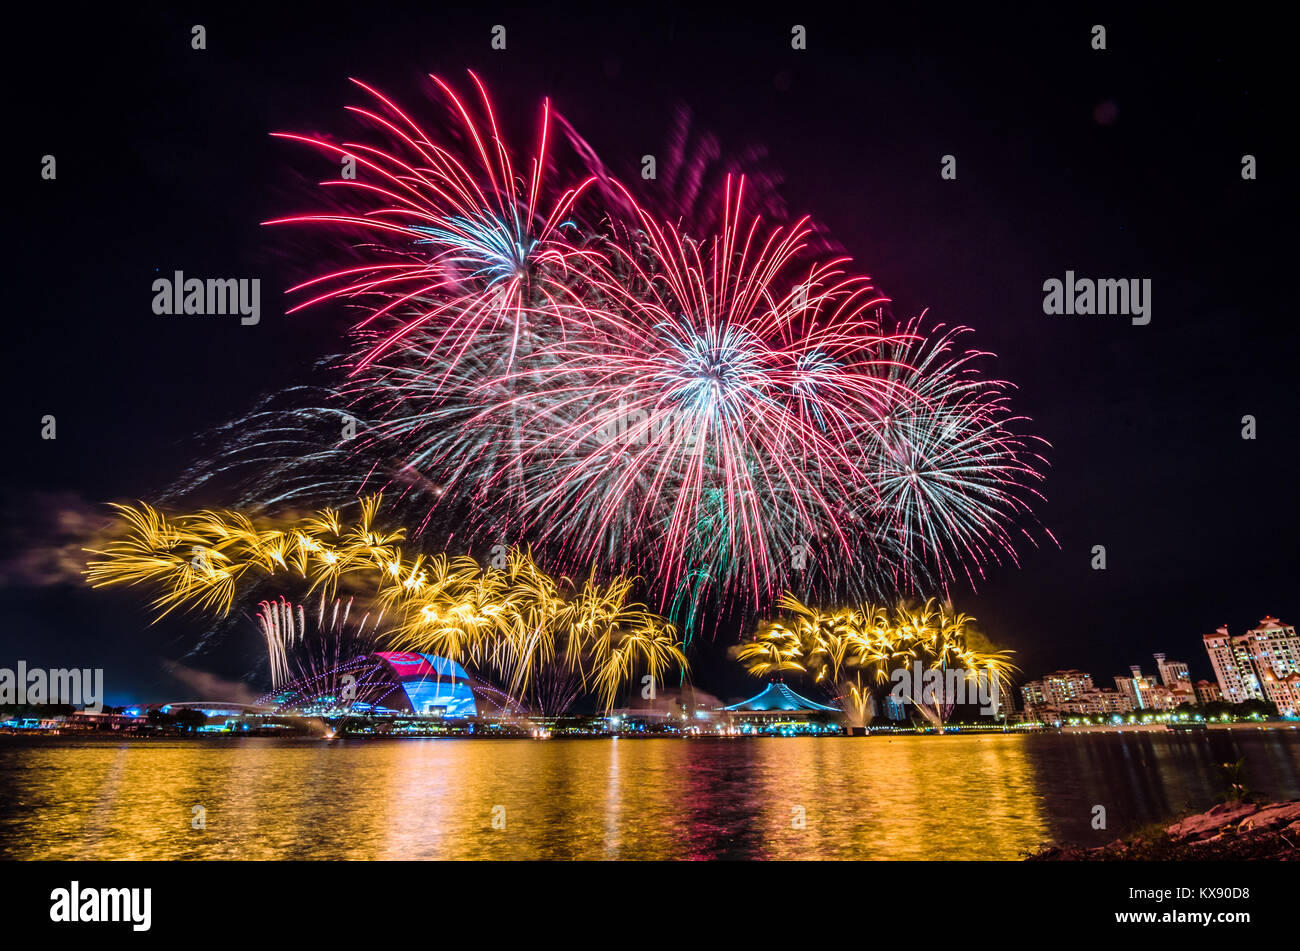 Firework display for Singapore National day which celebrated every year on August 9, in commemoration of the Singapore's independence in 1965. Stock Photo